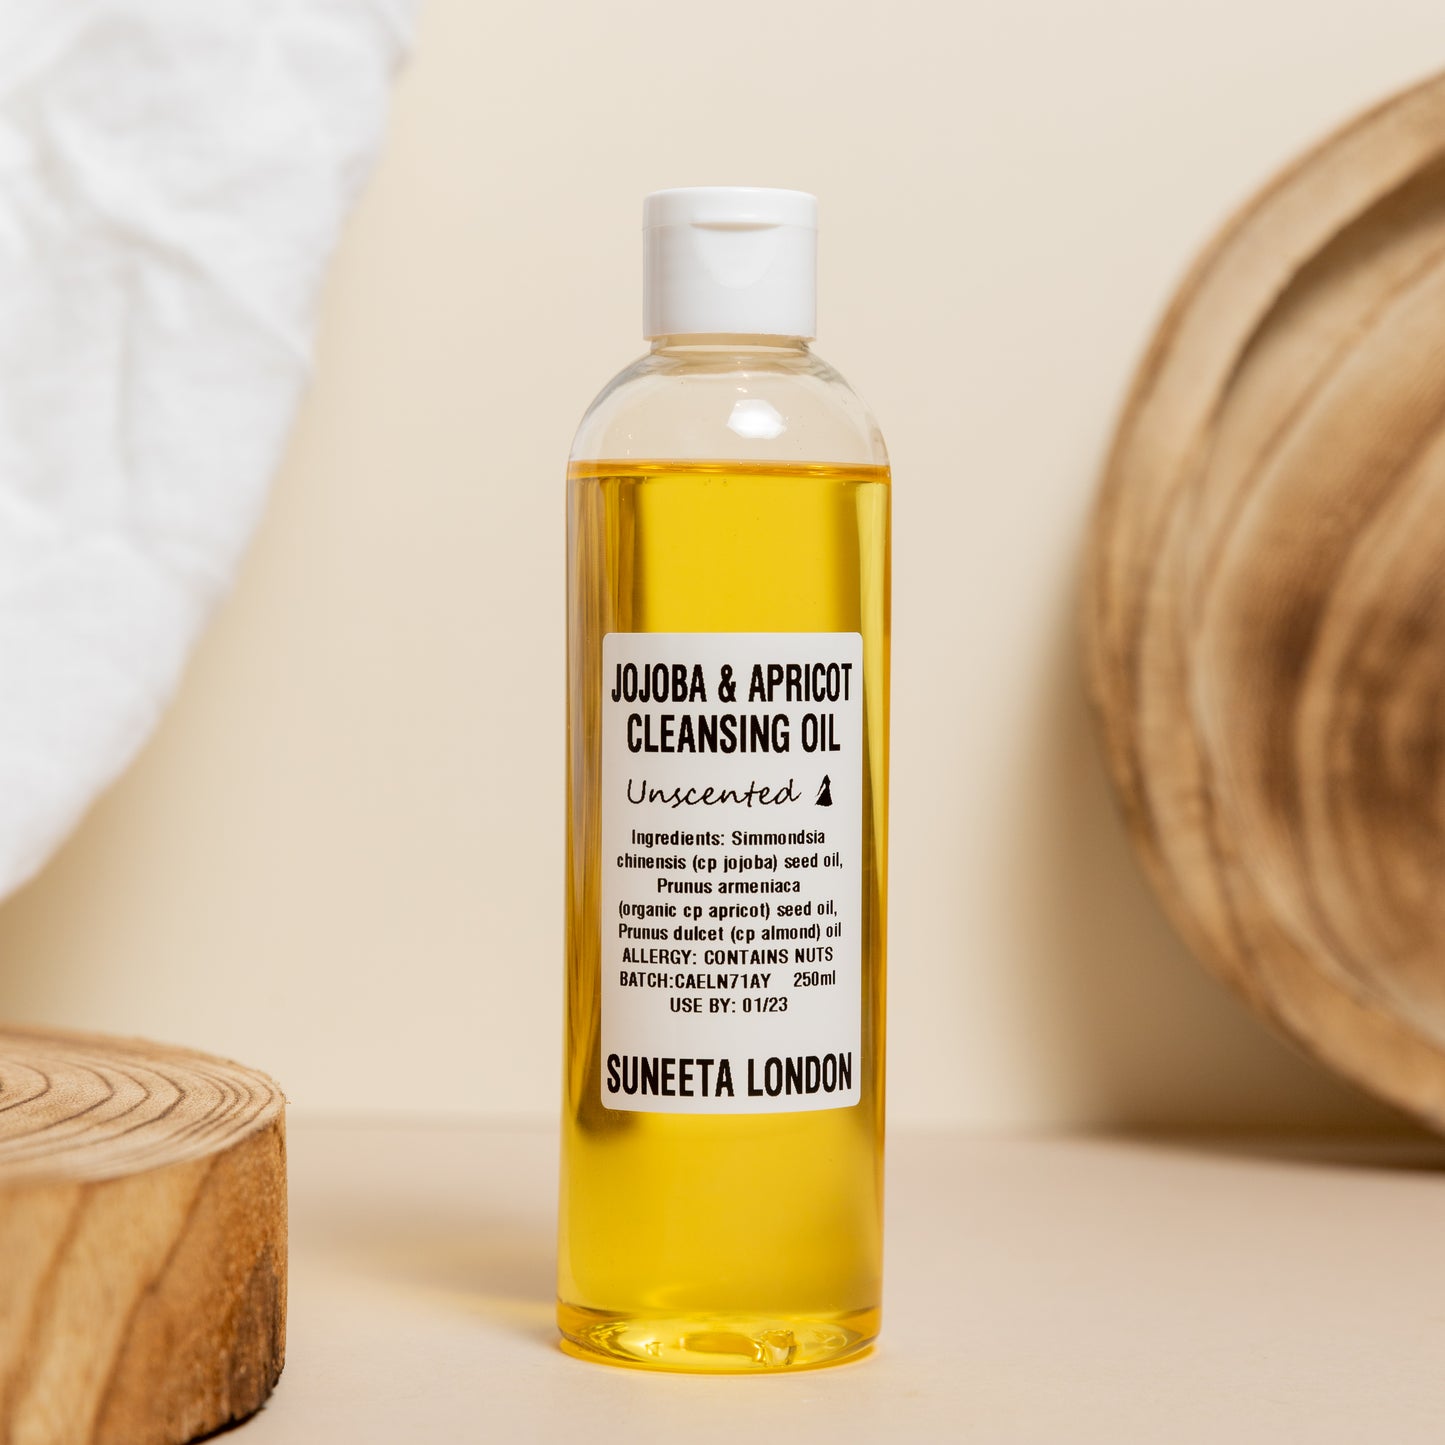 Jojoba & Apricot Cleansing Oil (unscented)